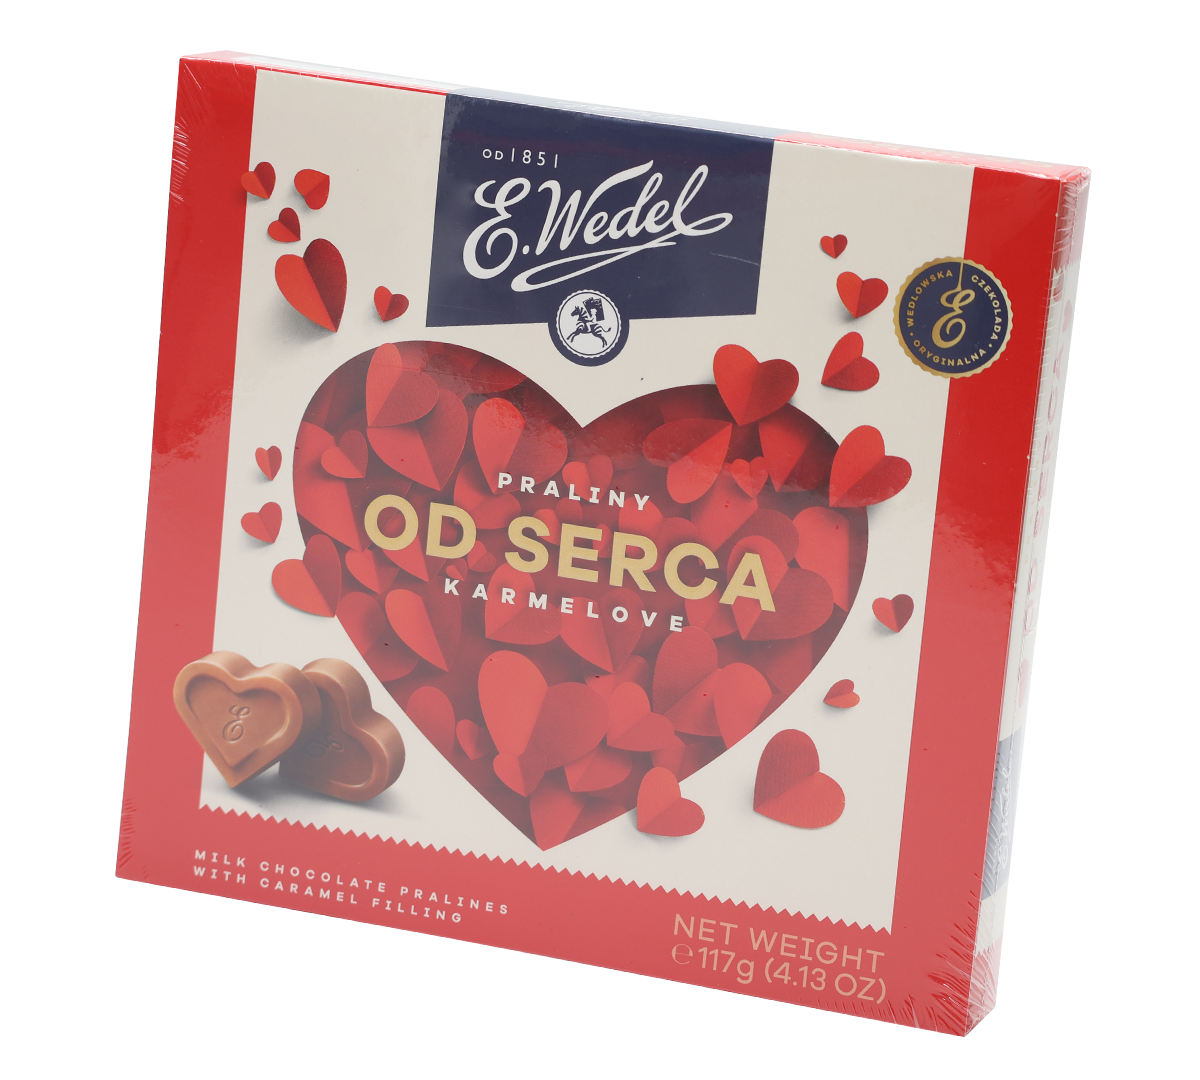 Wedel Pralines With Caramel Filling (OD Serca) 117g